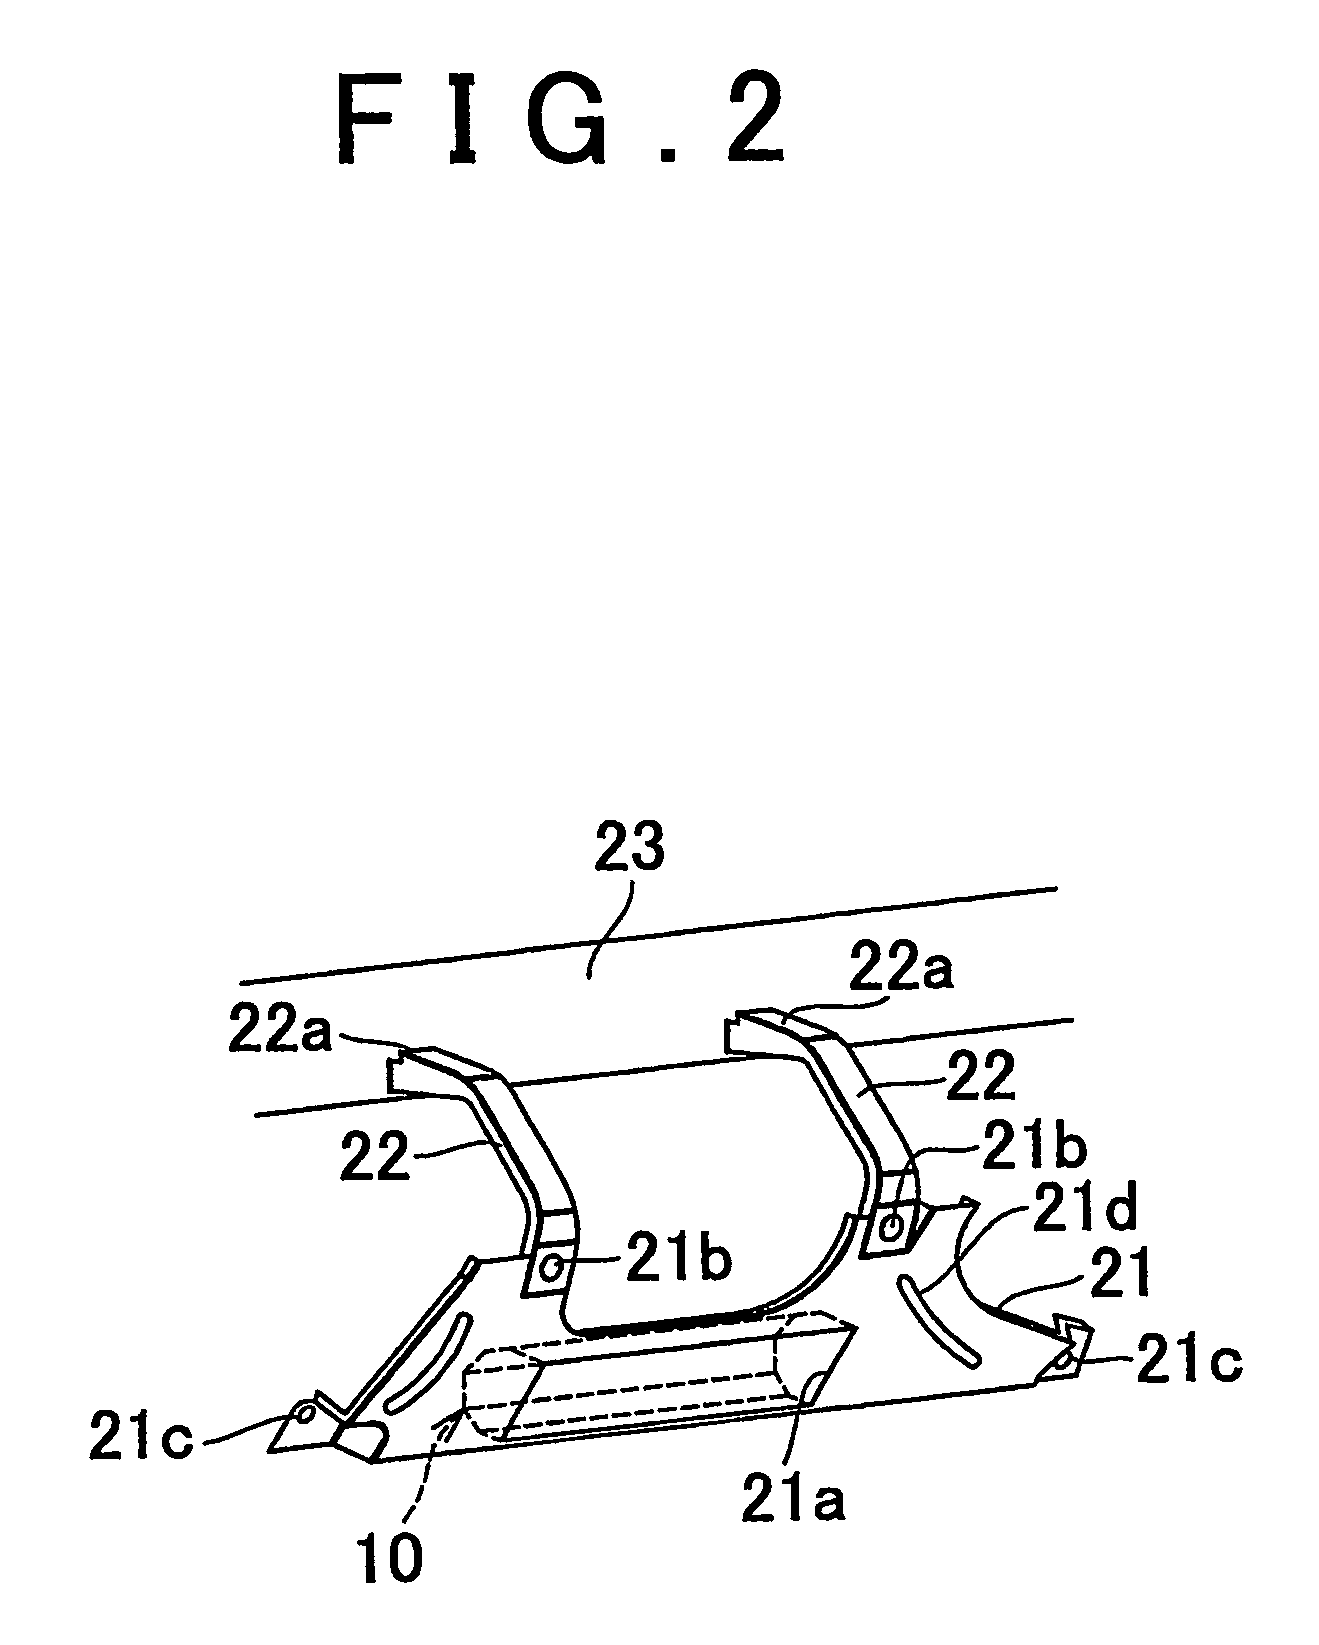 Knee protection apparatus for vehicle occupant